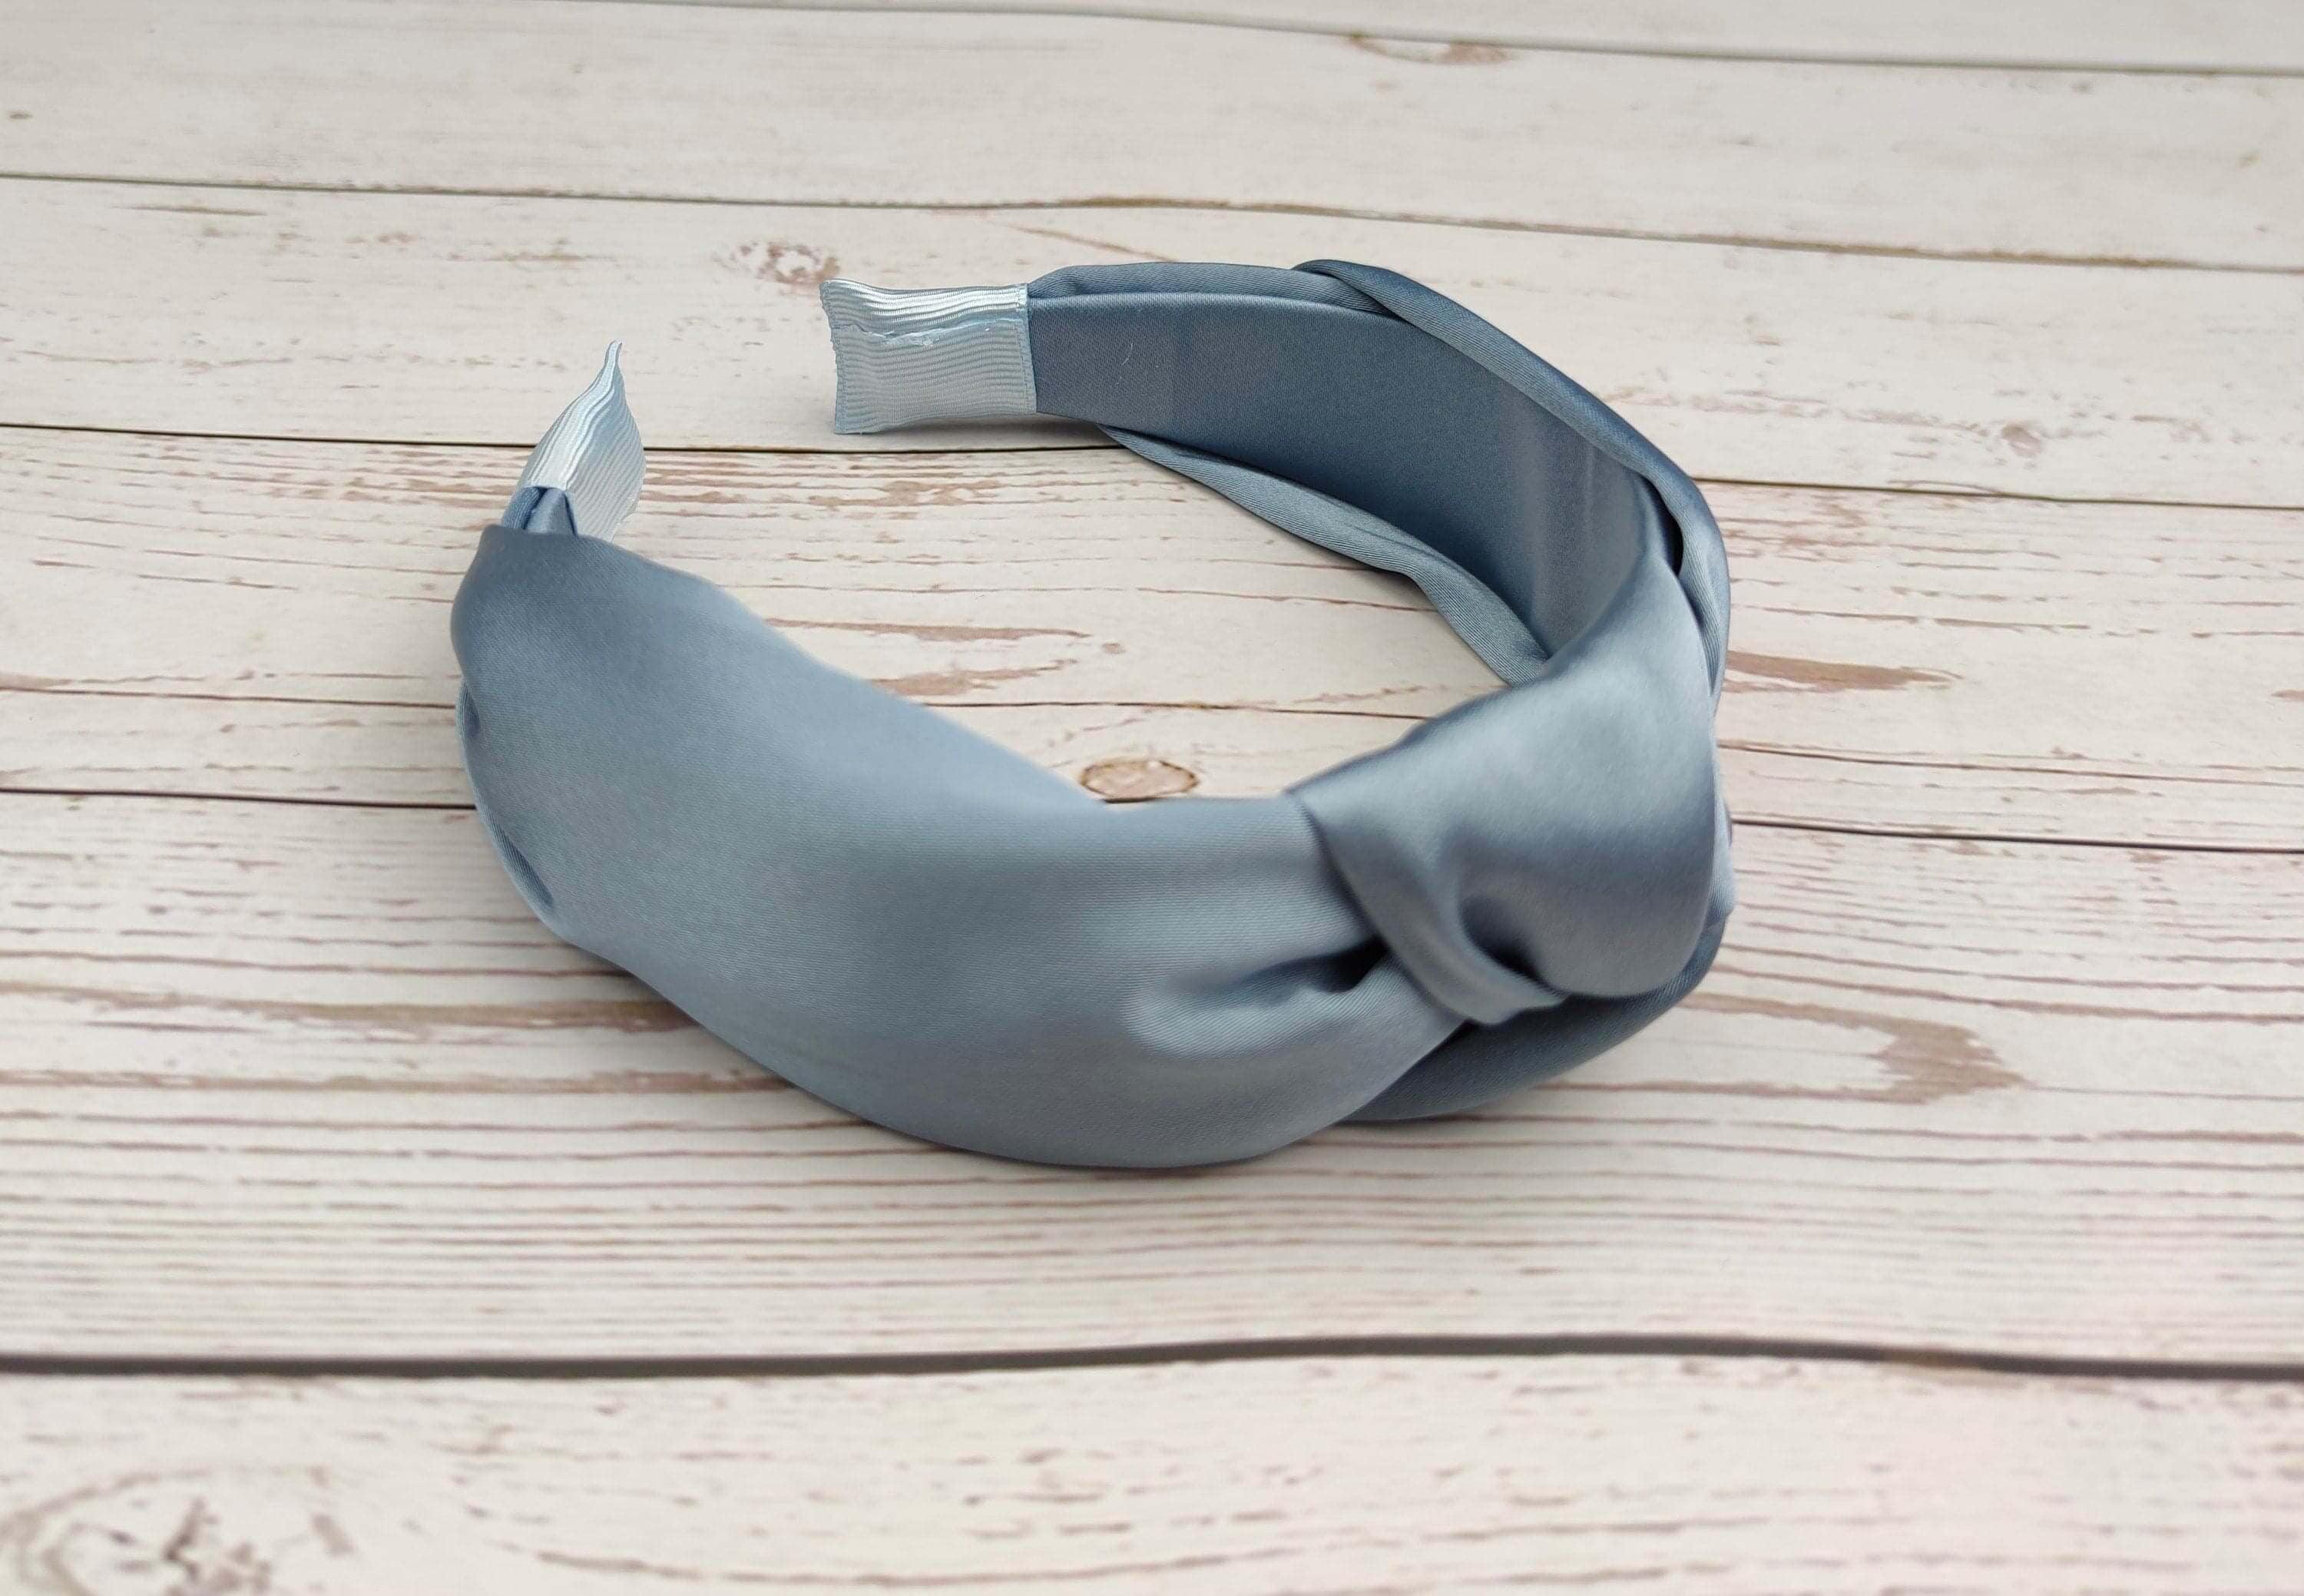 Transform your look with this bright blue satin headband, perfect for any occasion and without padding for ultimate comfort.